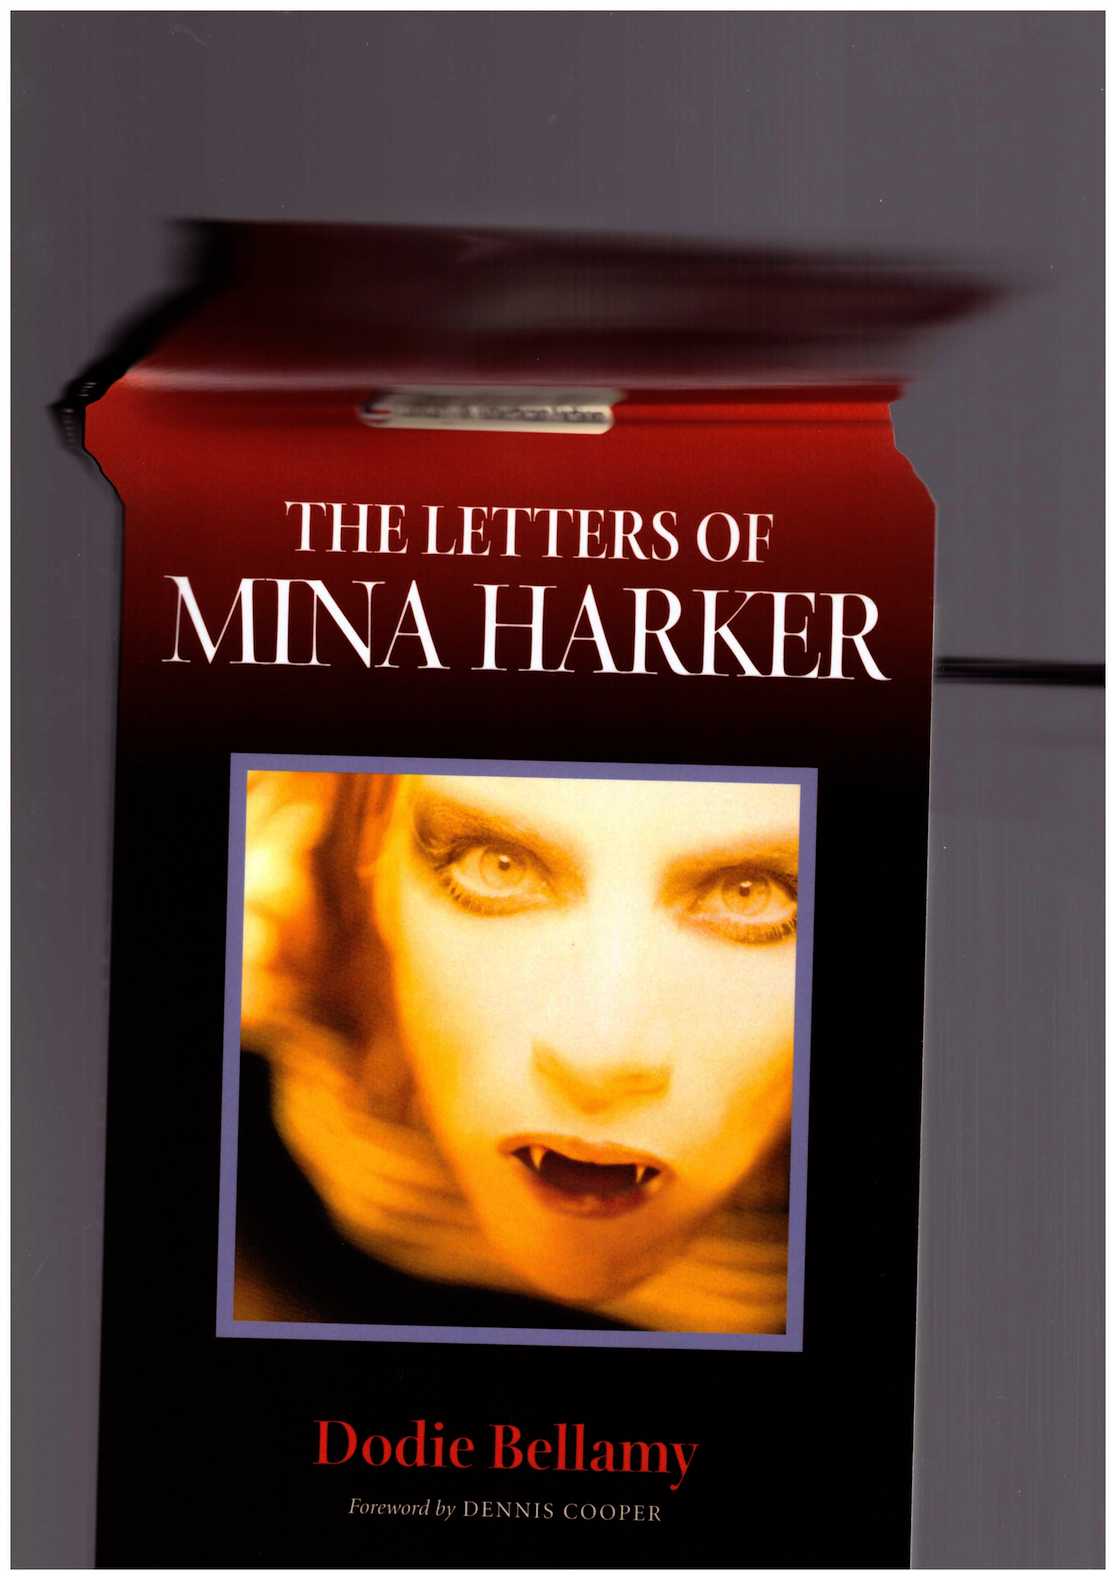 BELLAMY, Dodie - The Letters of Mina Harker